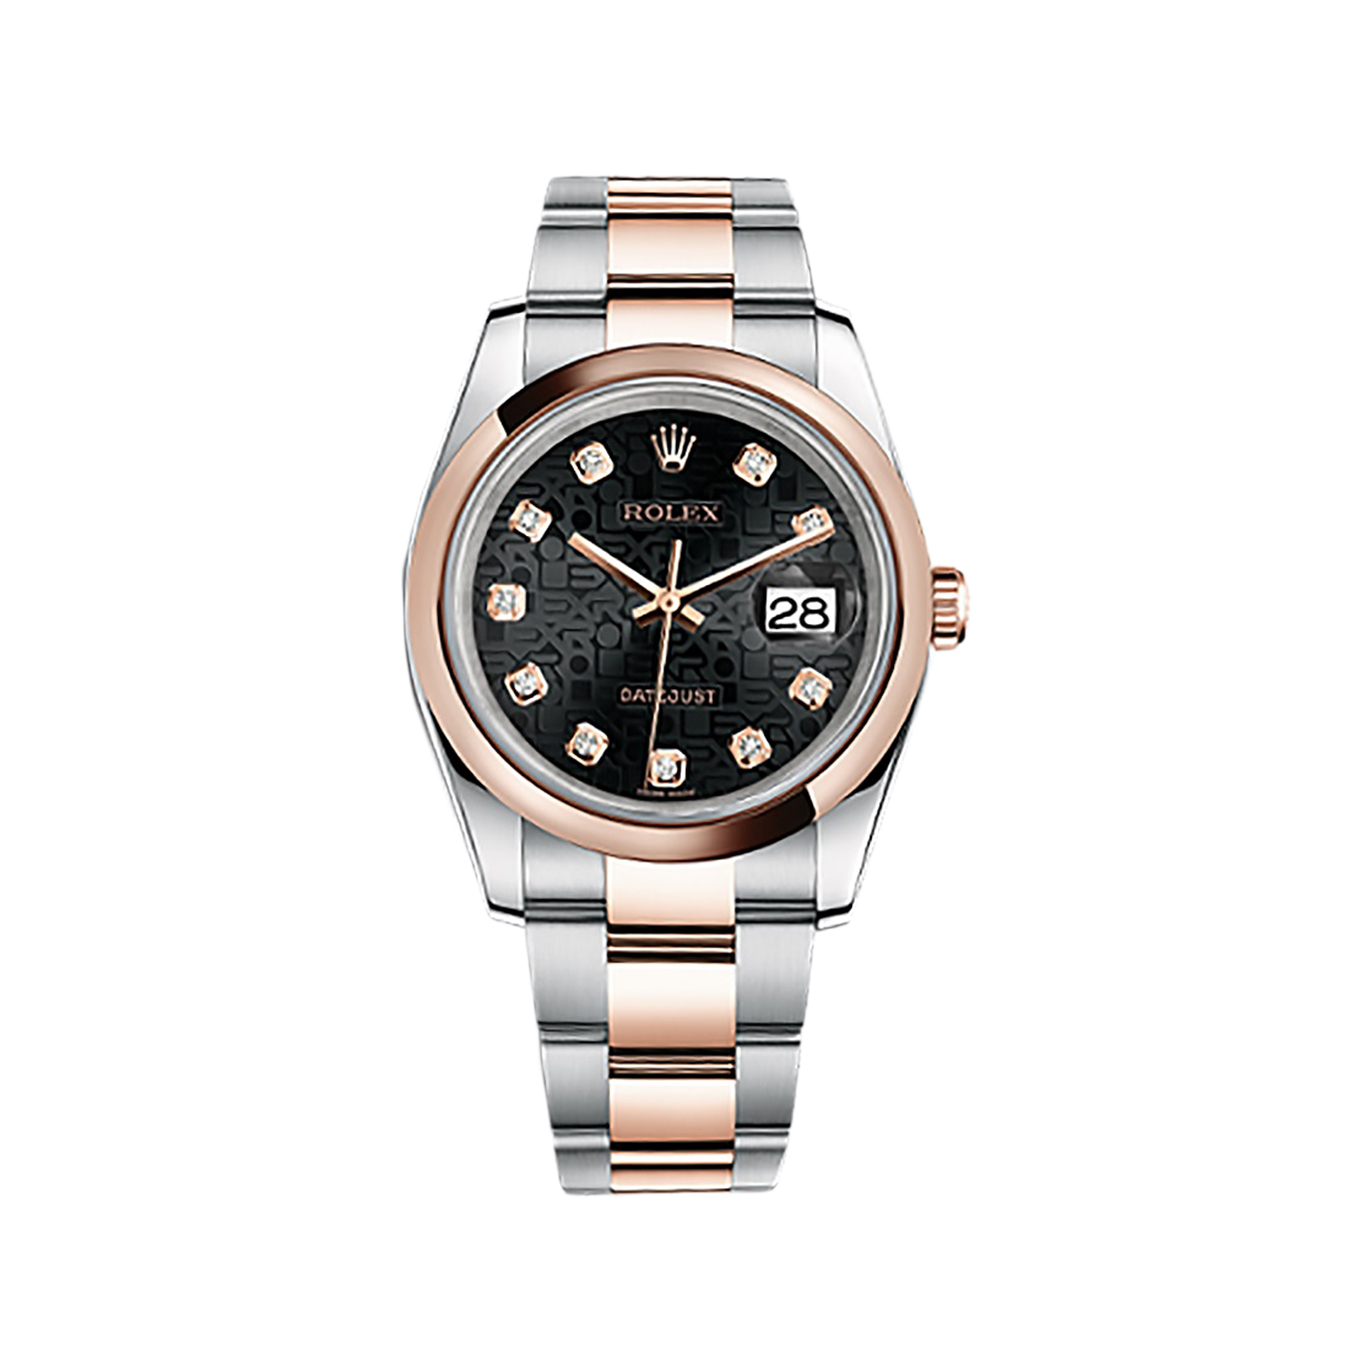 Datejust 36 116201 Rose Gold & Stainless Steel Watch (Black Jubilee Design Set with Diamonds)